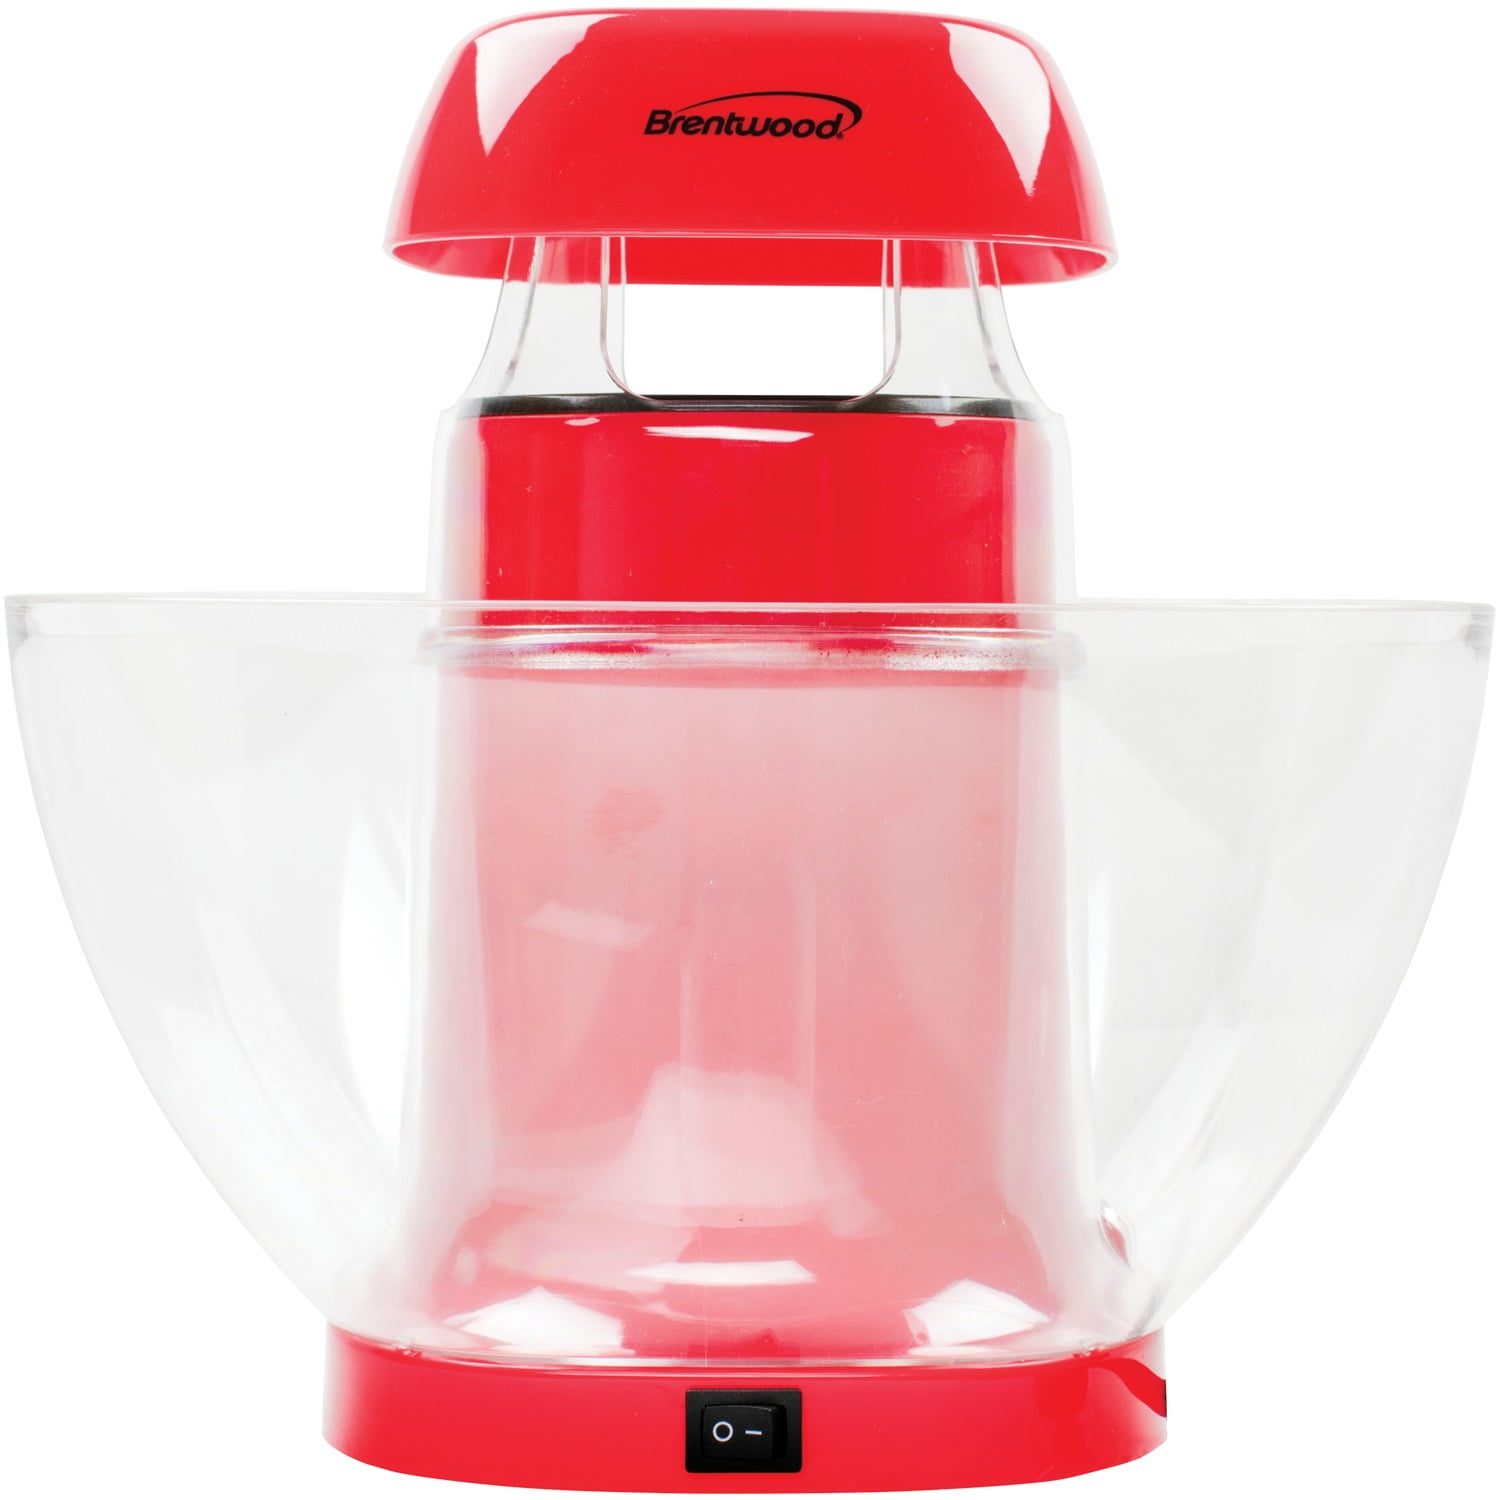 Brentwood Classic Striped 8 Cup Electric Hot Air Popcorn Maker , Red